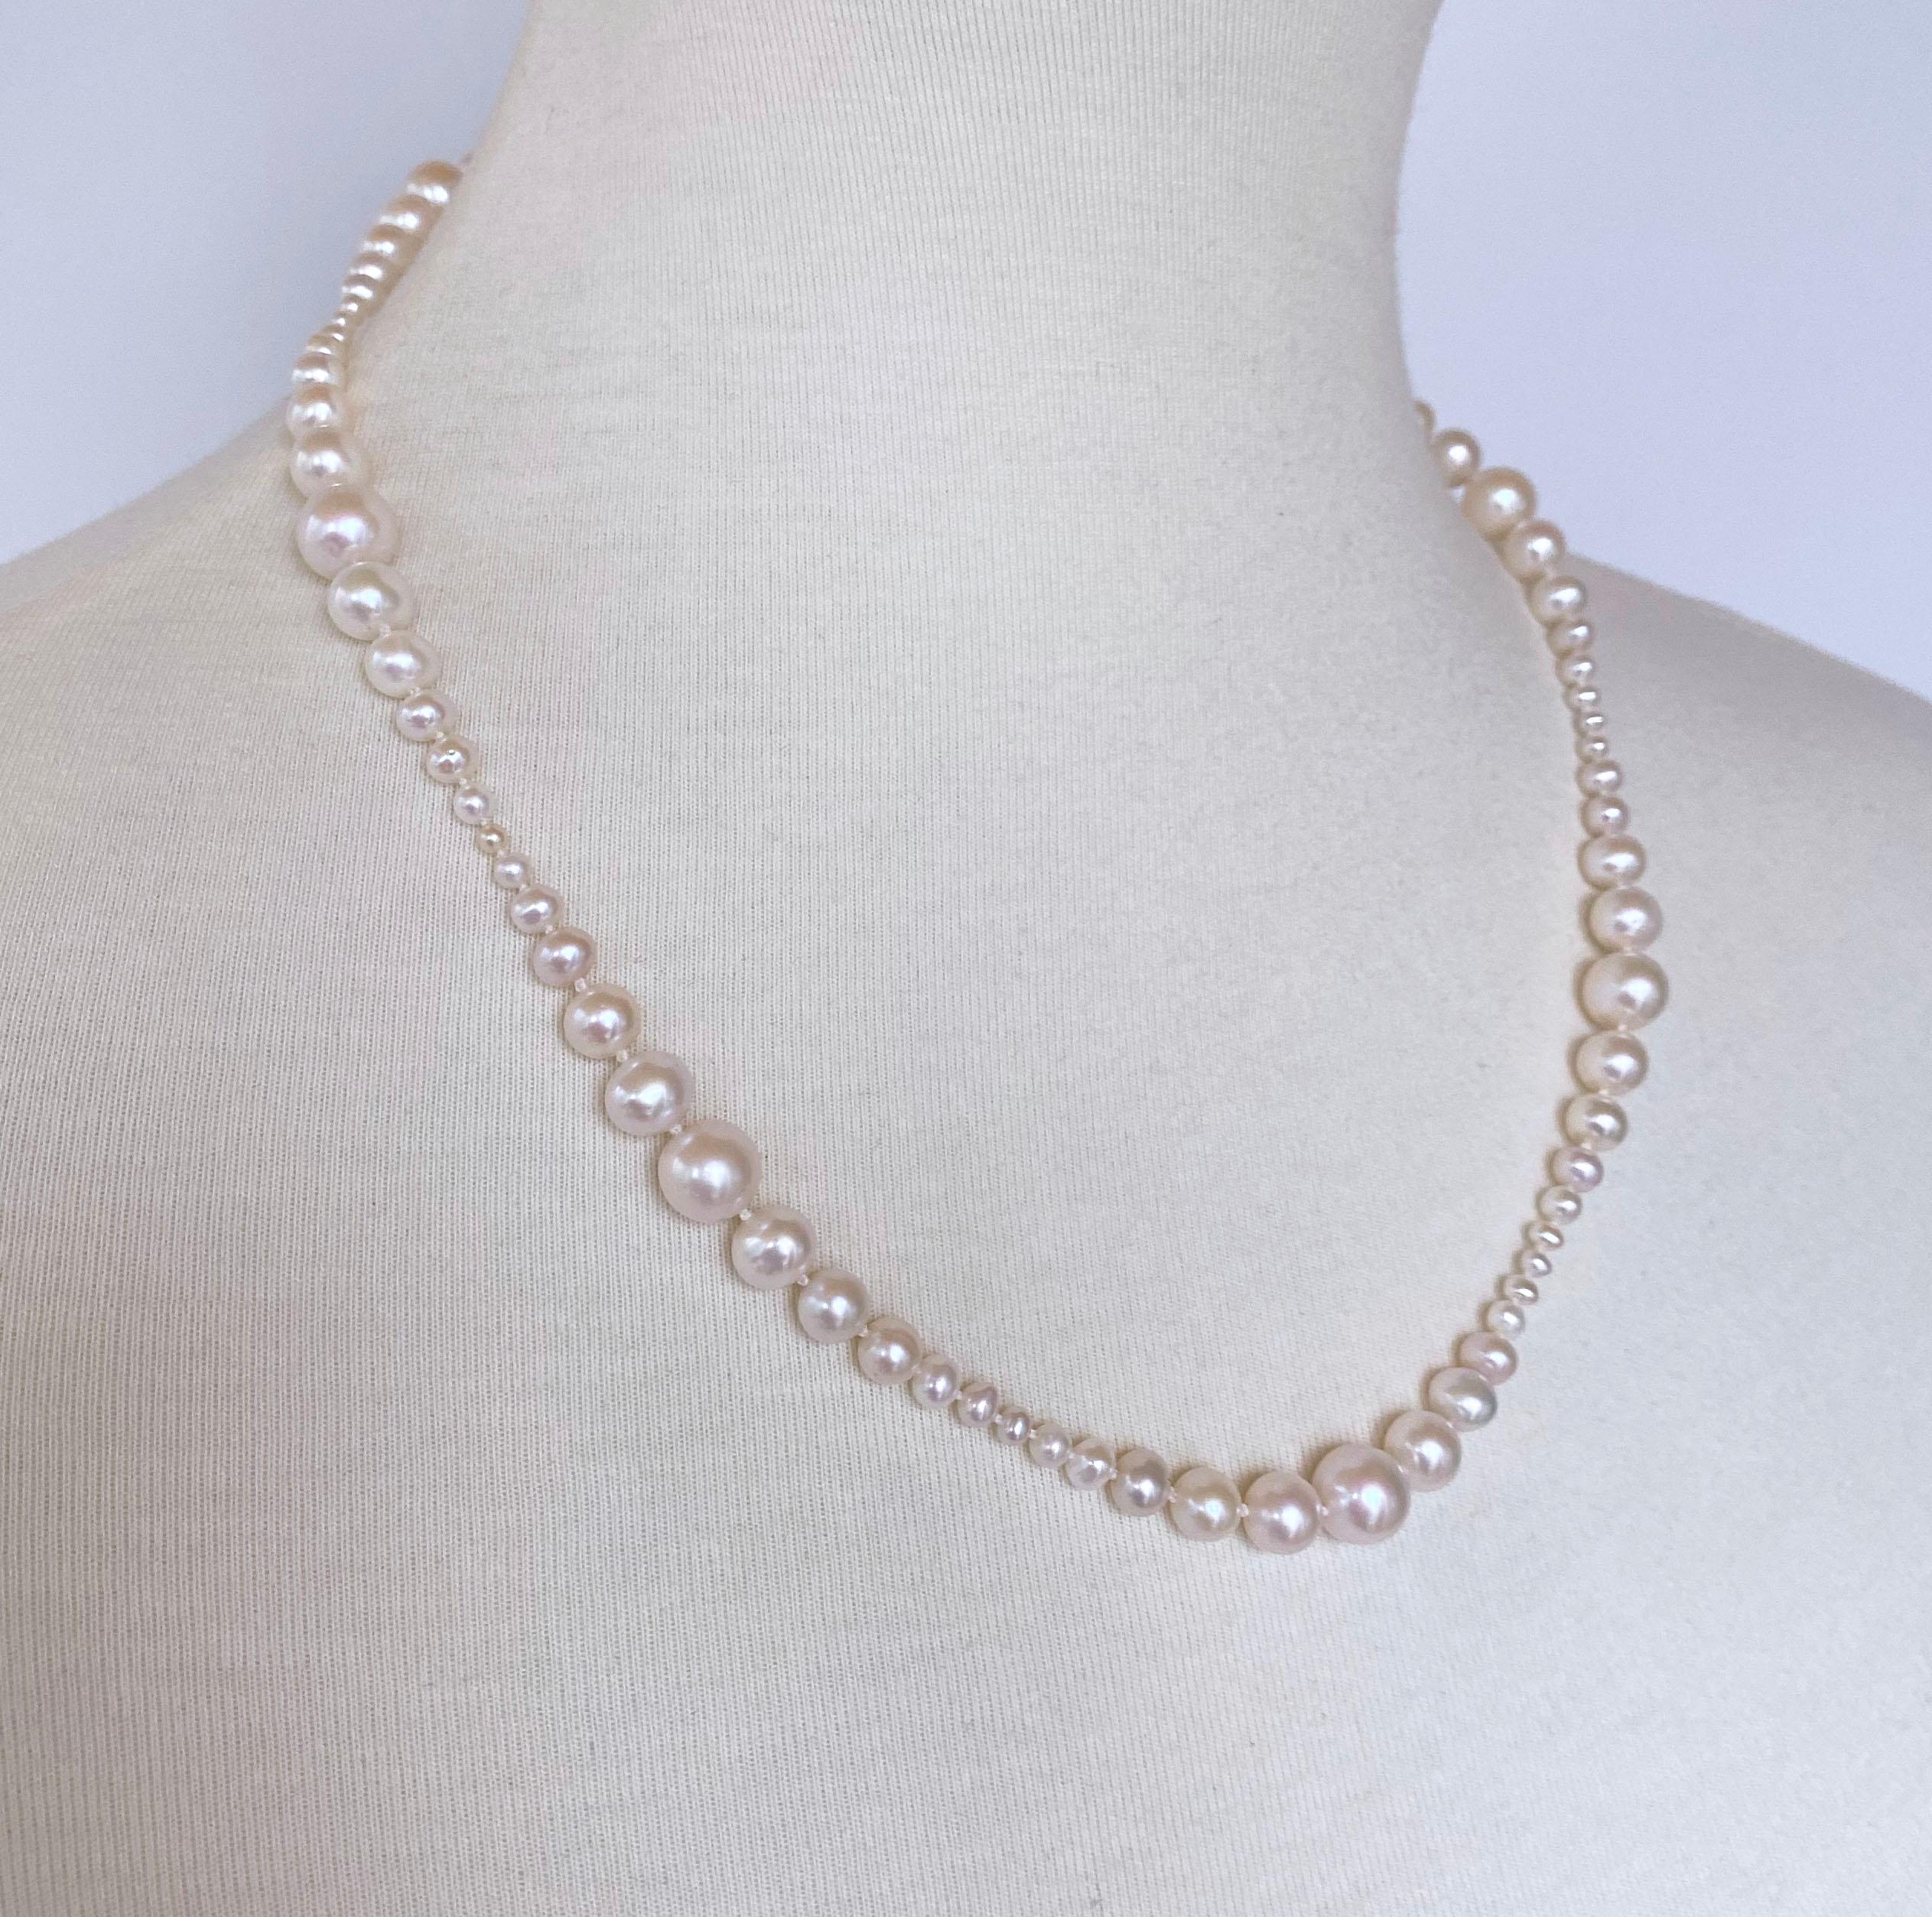 Women's Marina J. Graduated White Pearl Necklace with 14 Karat Yellow Gold Clasp 